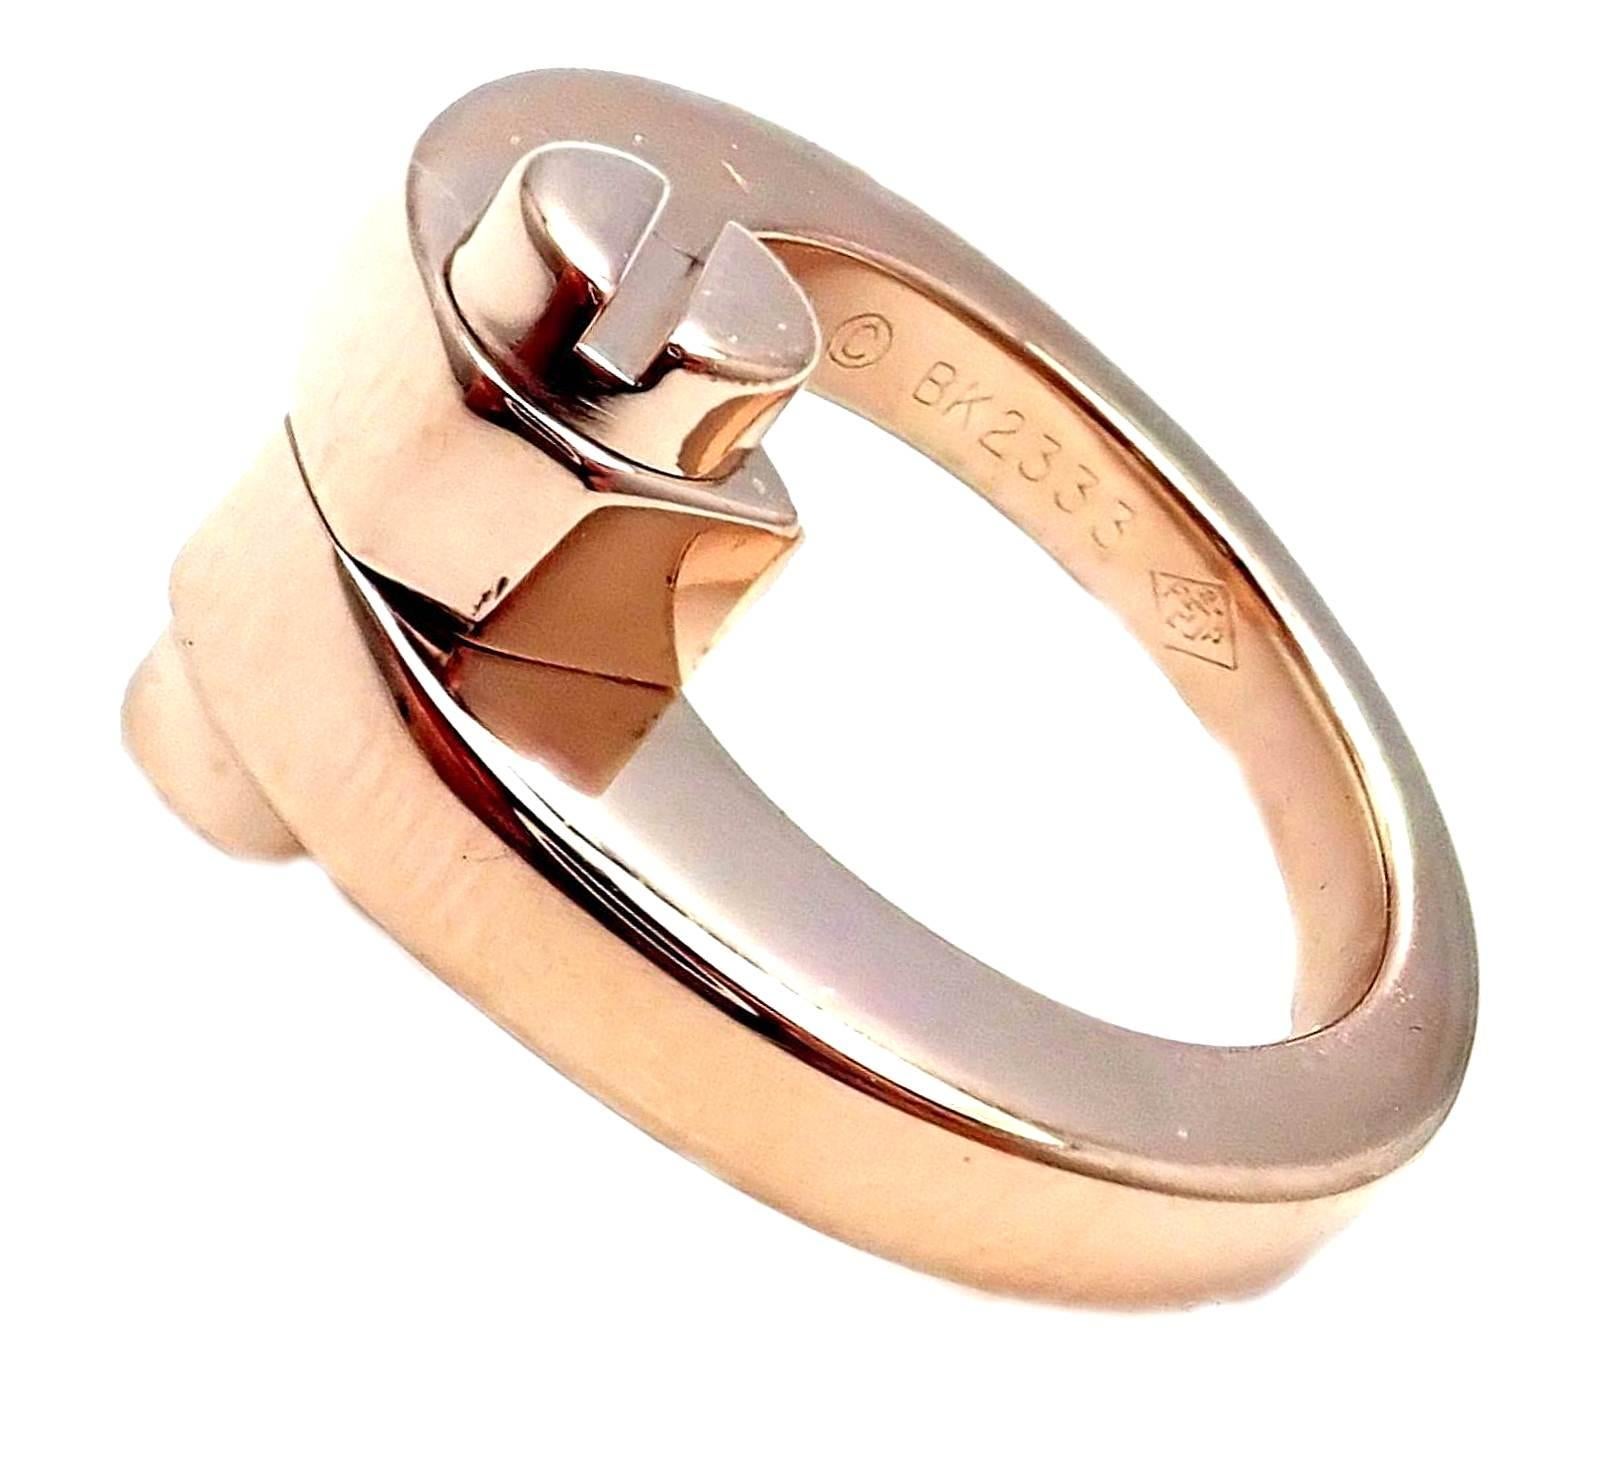 18k Rose Gold Menotte Band Ring by Cartier. 
Details: 
Ring Size: European 48, US 4.5
Weight: 13.3 grams
Width: 12mm
Stamped Hallmarks: Cartier 50 750 BK2333
*Shipping within the United States* 
YOUR PRICE: $2,000
Ti269nmd